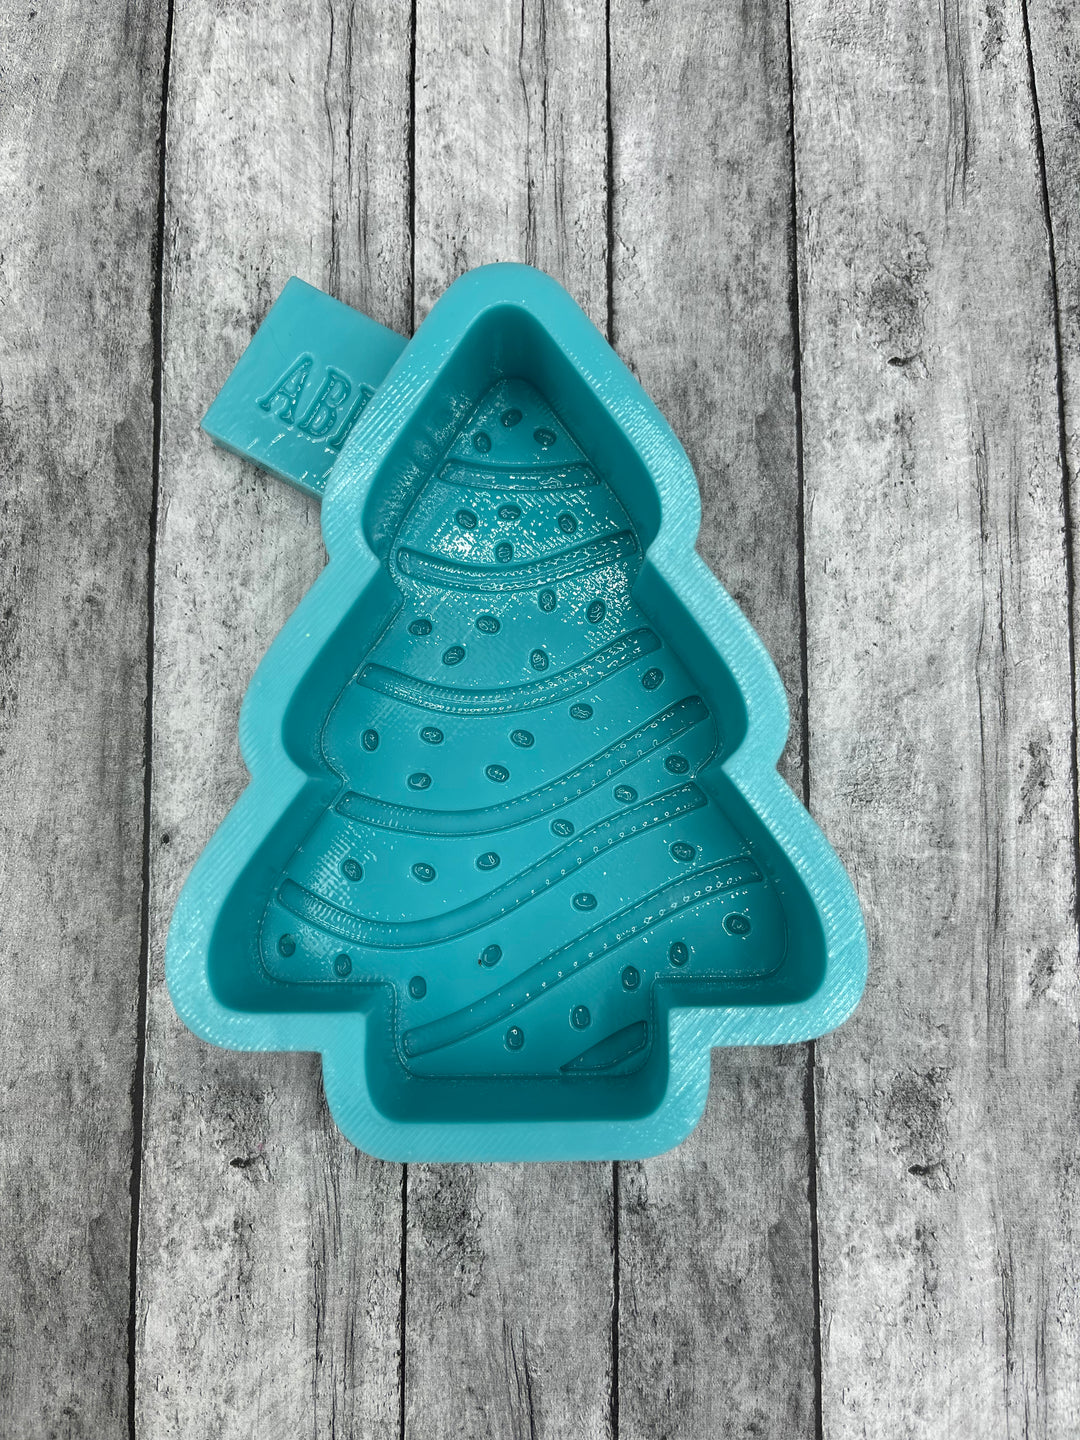 Lil Debbie with Sprinkles Freshie Silicone Mold